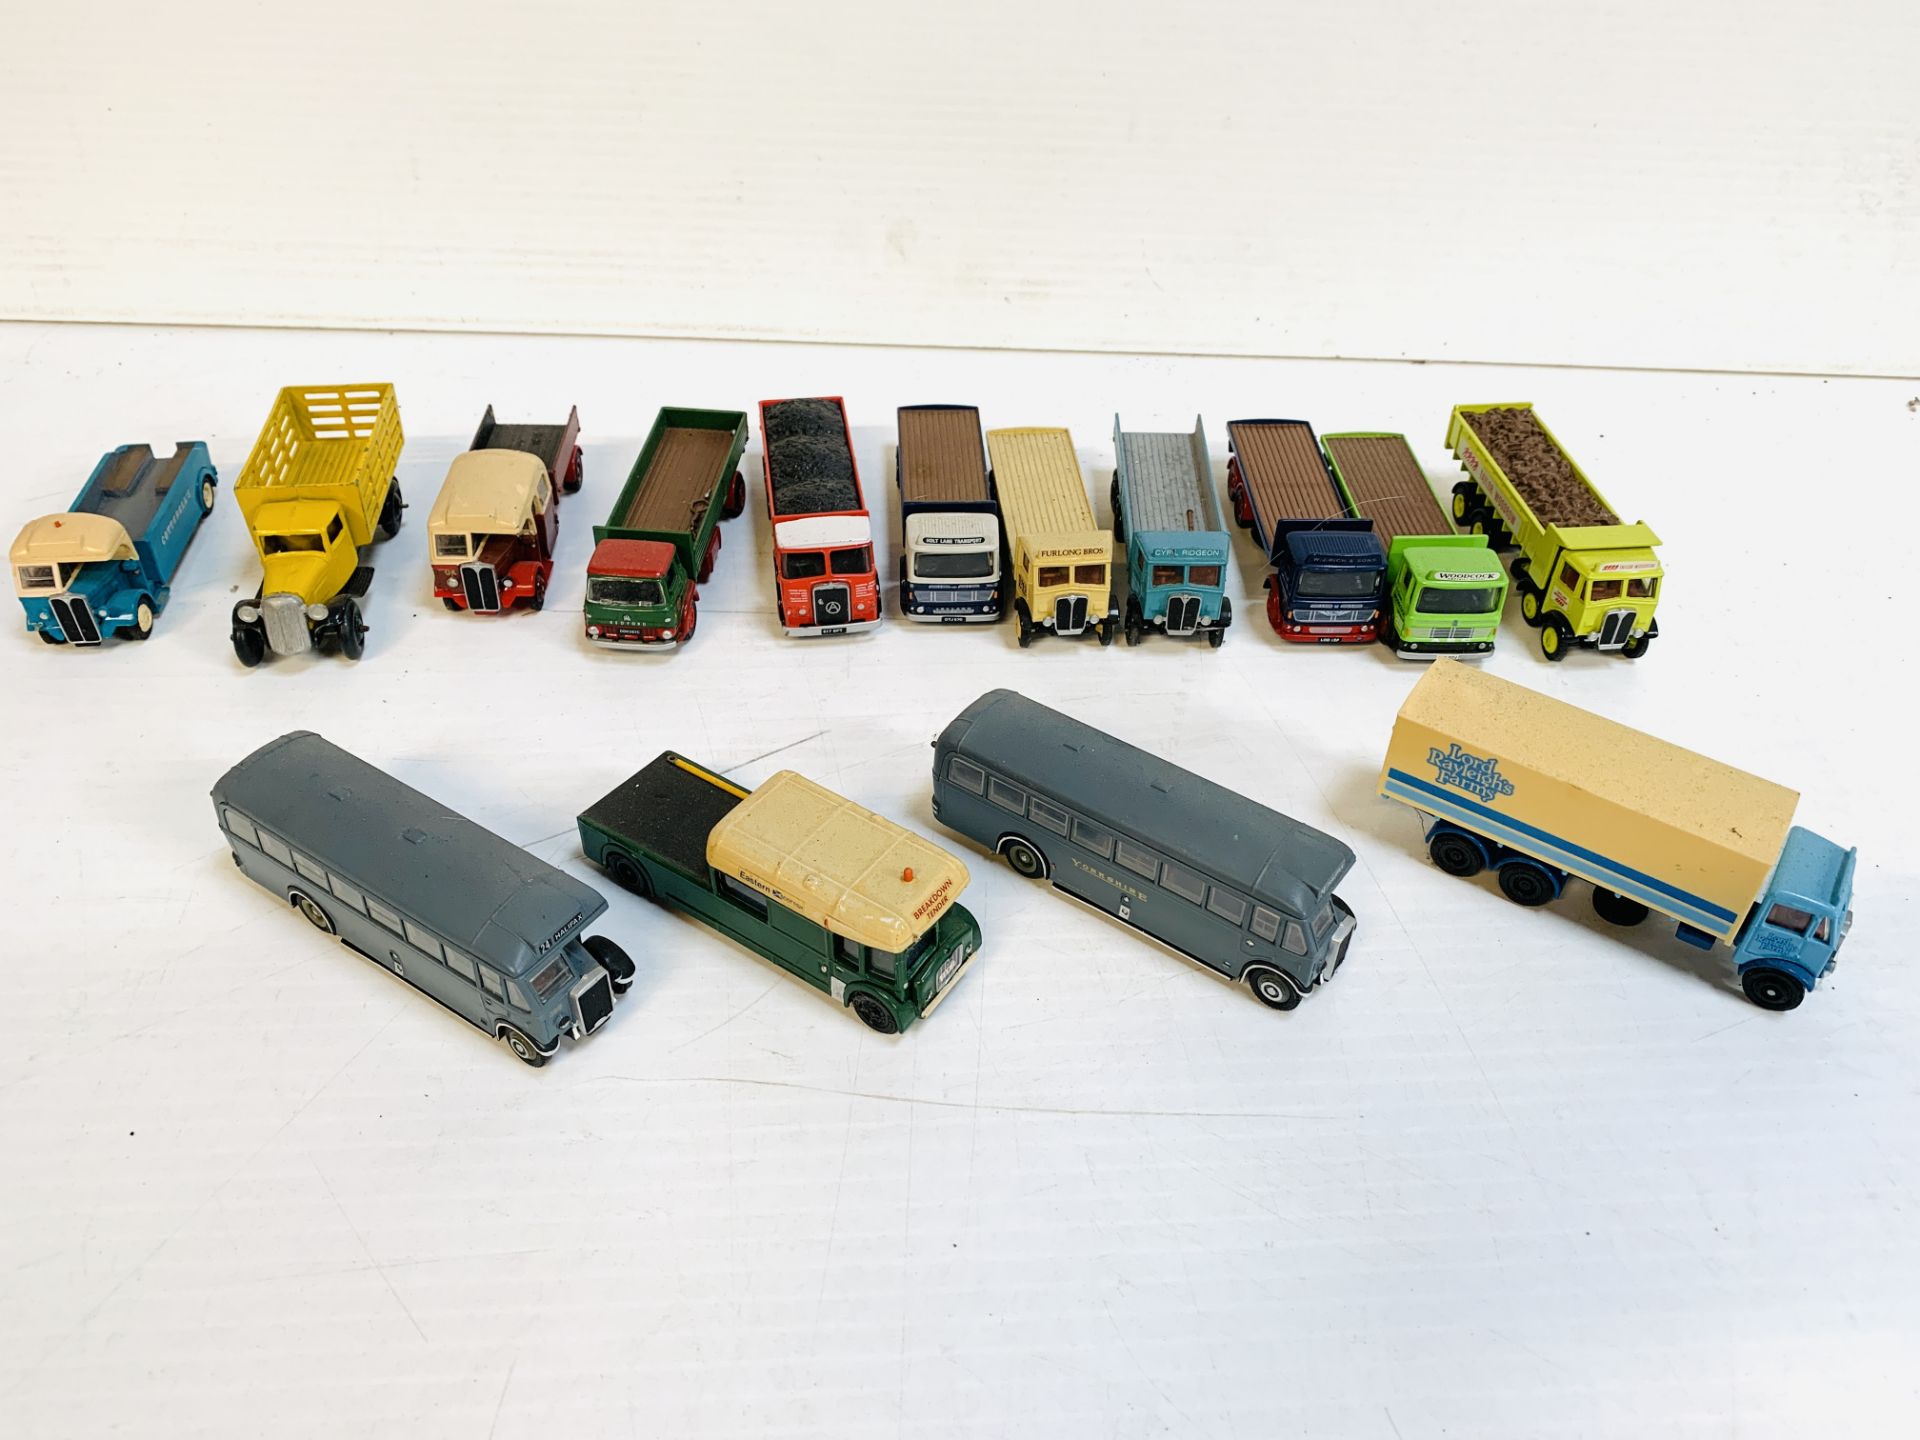 Fifteen diecast model lorries and coaches